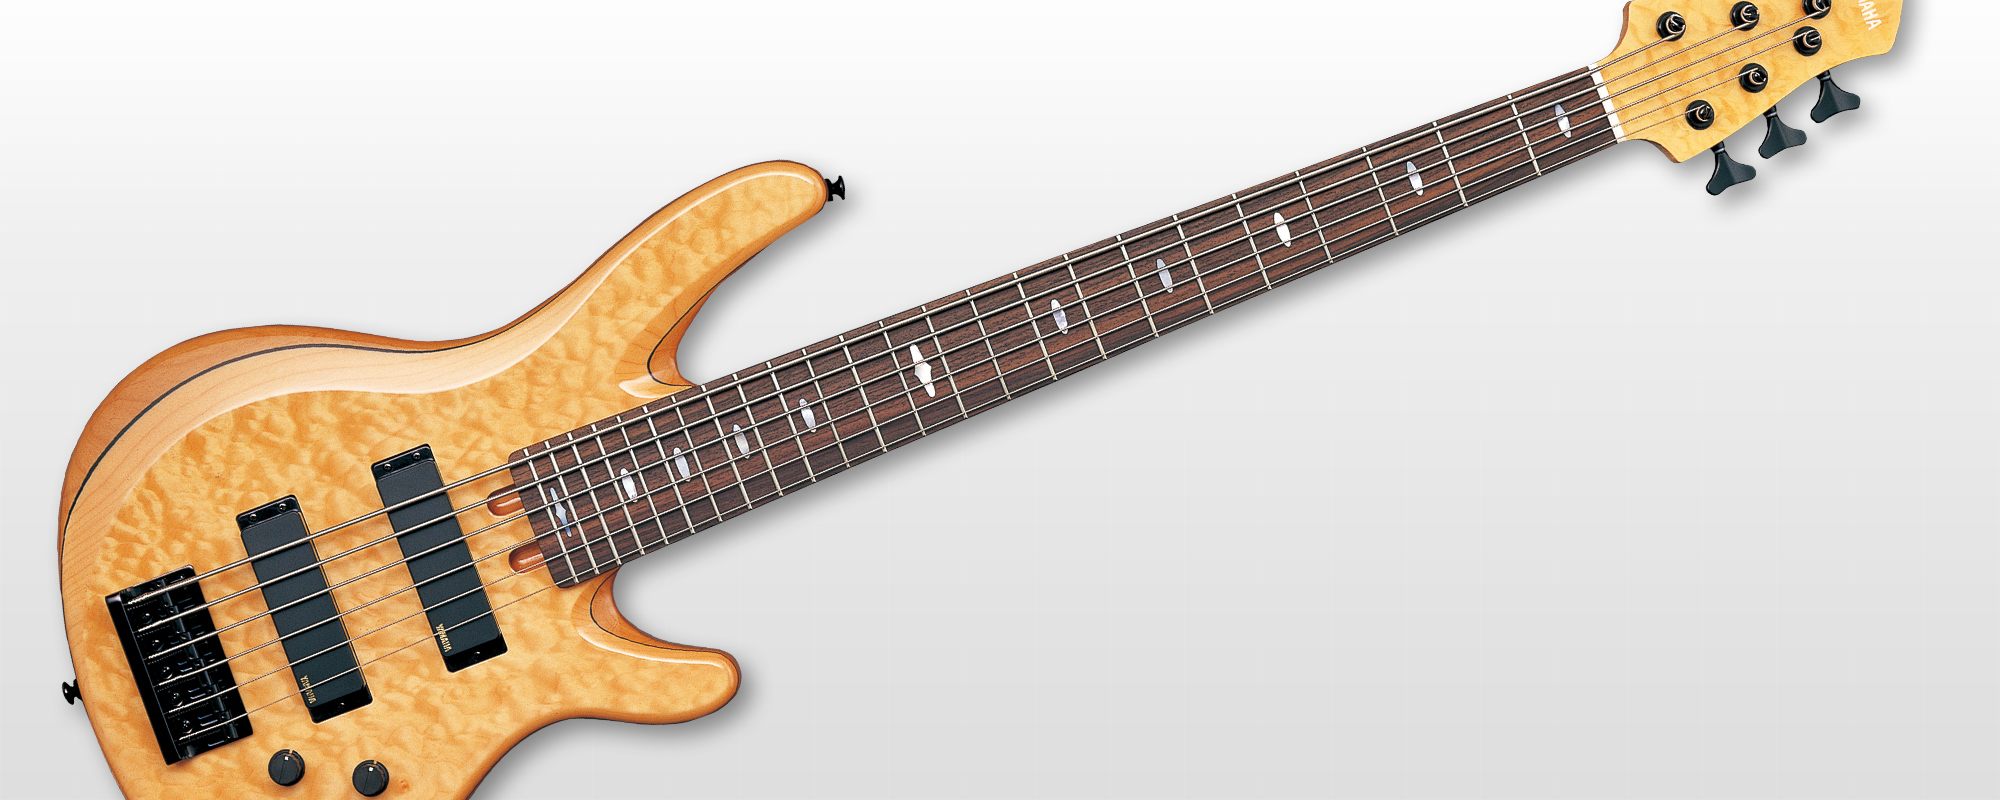 TRB - Overview - Electric Basses - Guitars, Basses, & Amps 